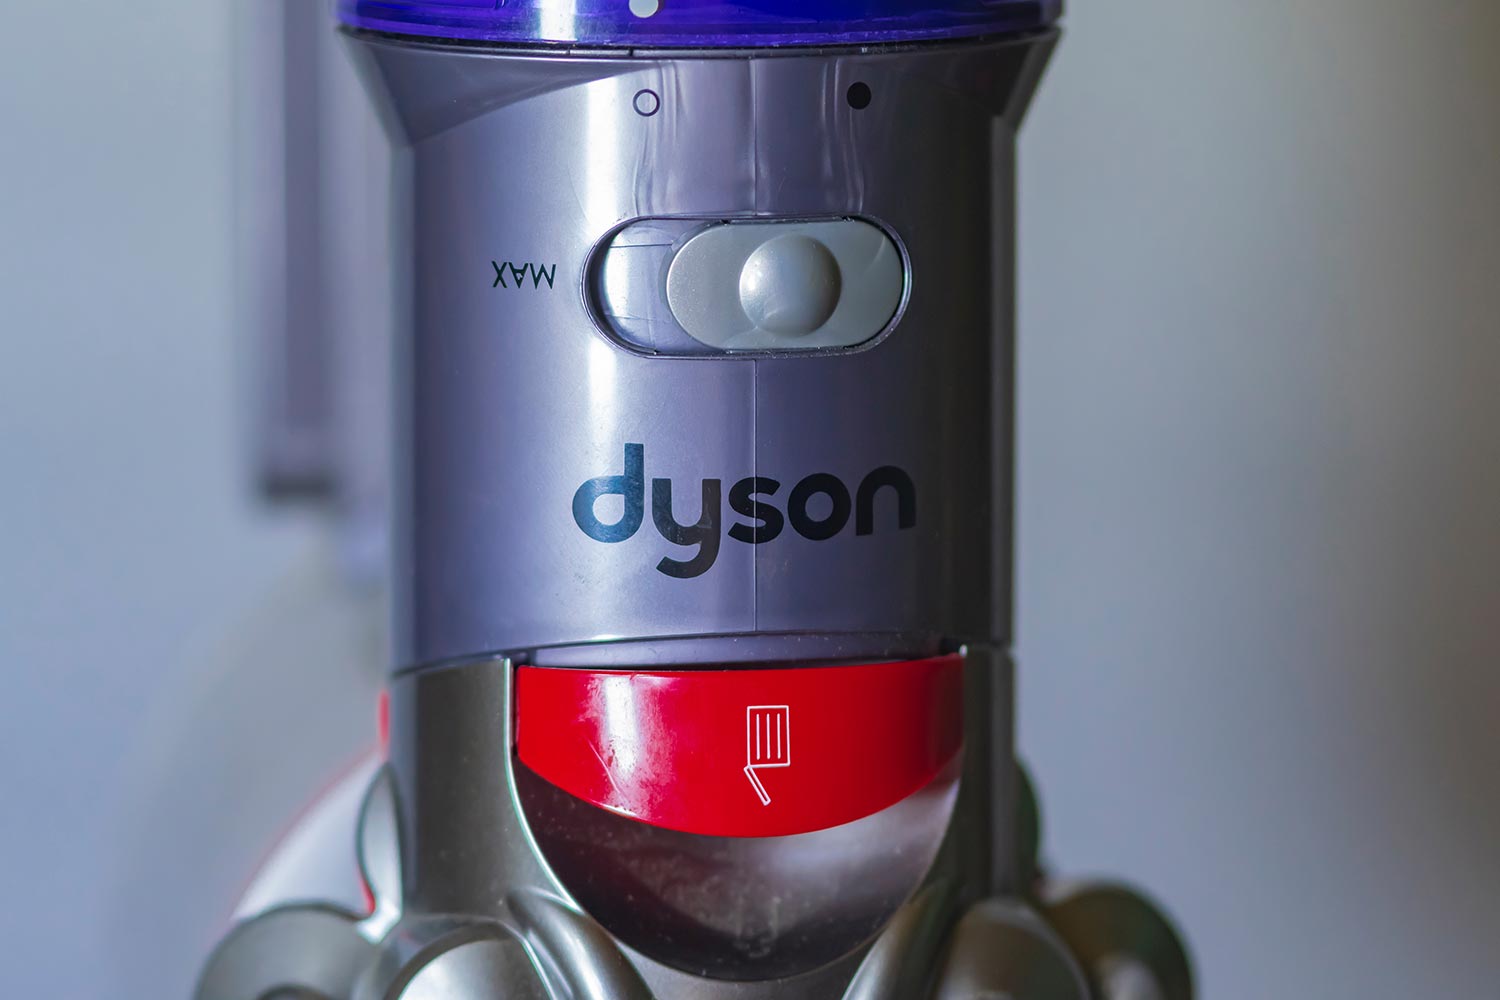 A popular vacuum cleaner from the company Dyson